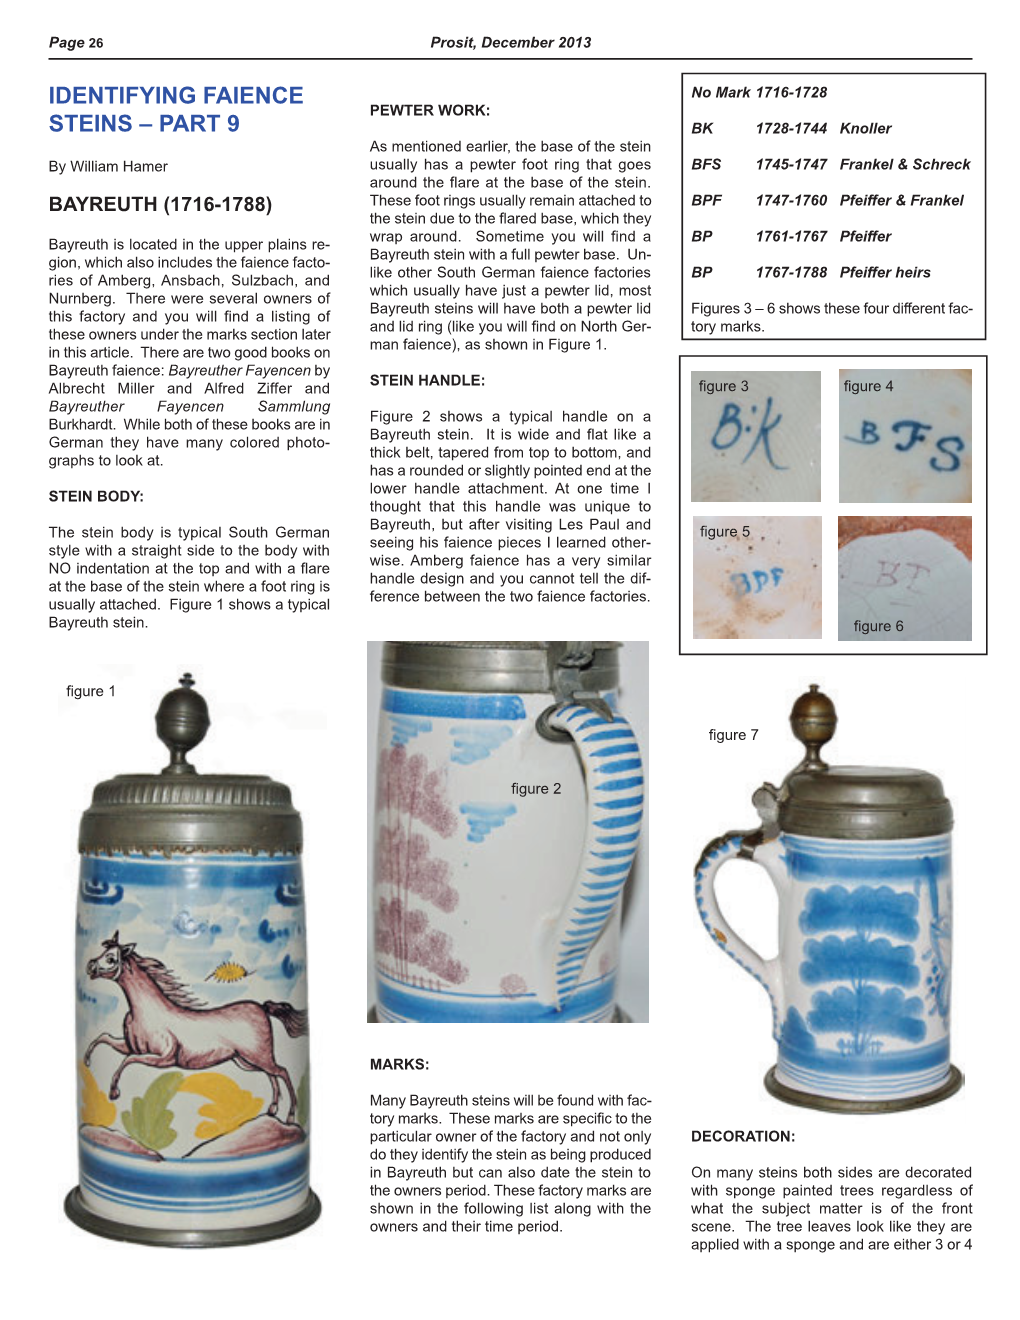 Identifying Faience Steins